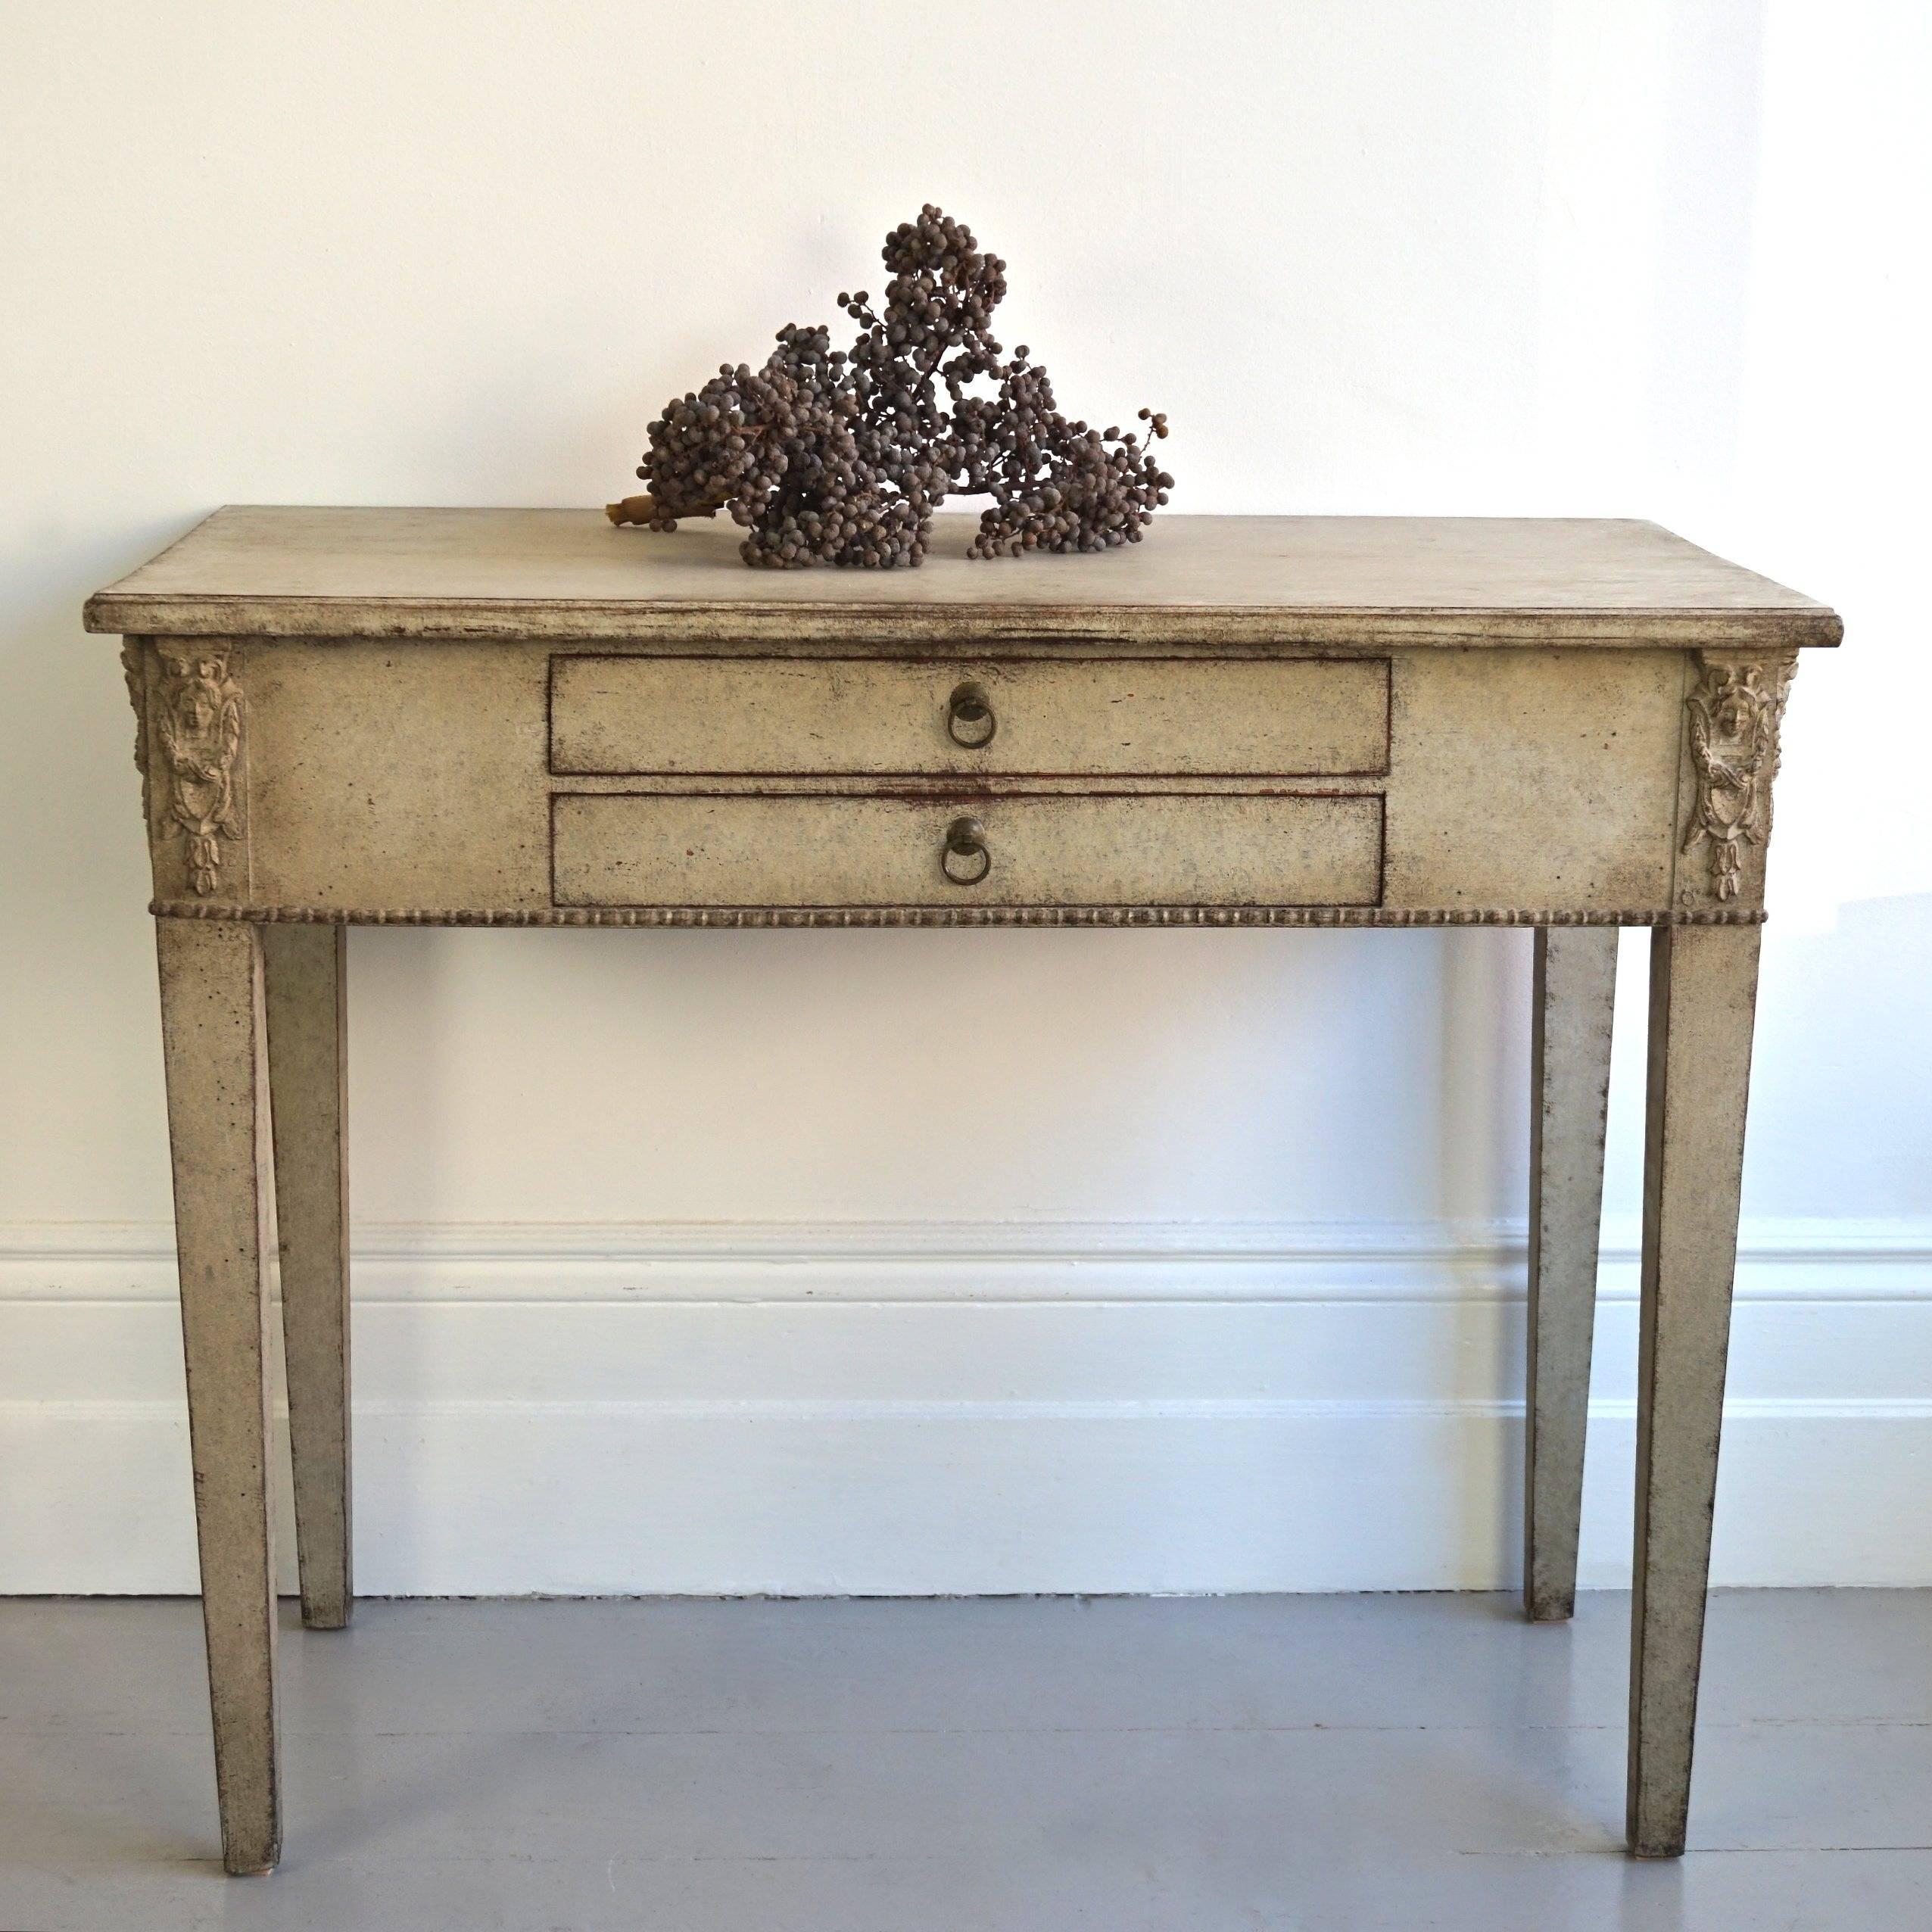 A very fine late Gustavian period side table or console with a rare two drawer configuration and decorative Empire carvings to each corner. A beautiful piece that would work wonderfully as a small writing desk, or dressing table, Swedish, circa